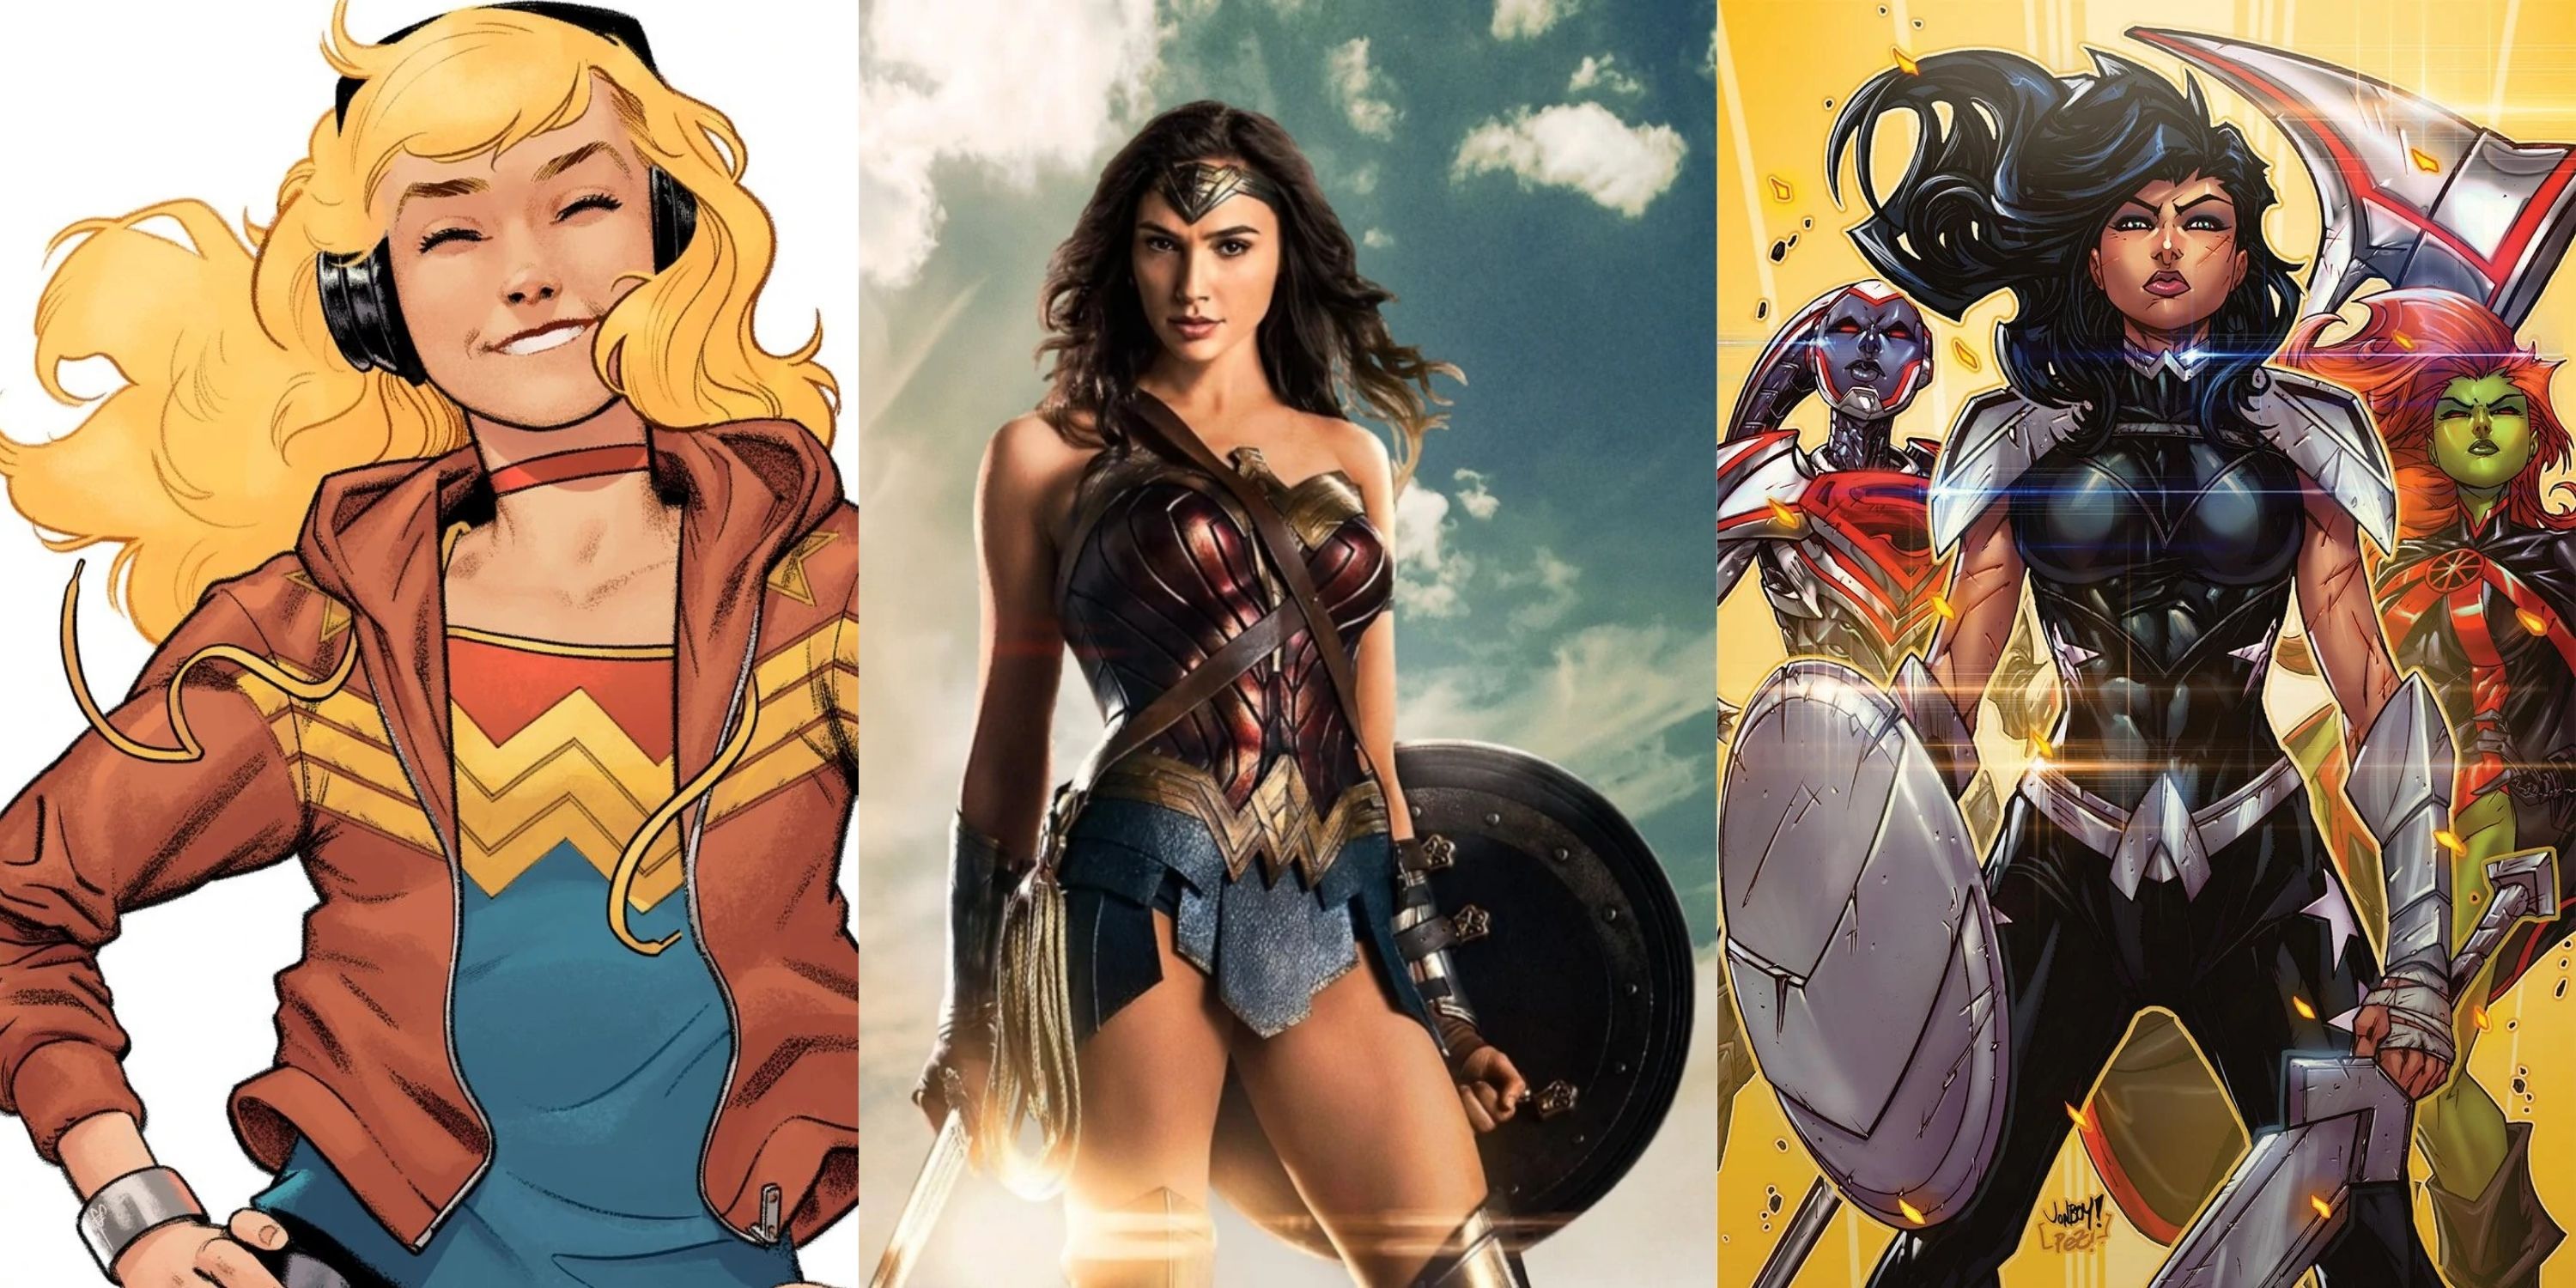 Wonder Woman characters Not Yet in the DCEU